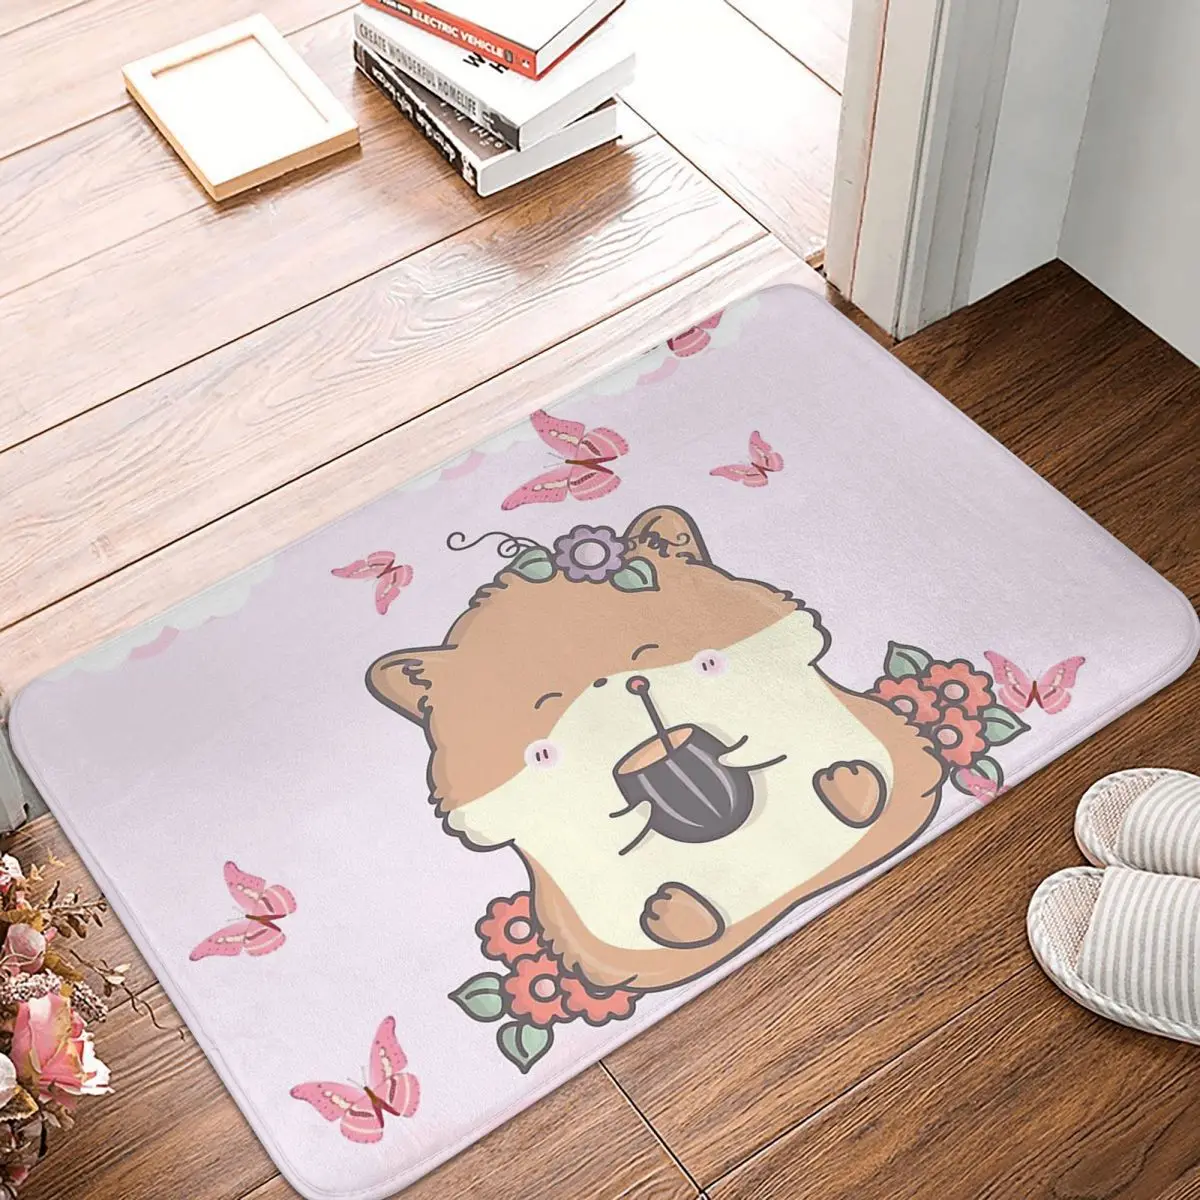 

Hamster Show Off One's Cleverness Bath Non-Slip Carpet Butterfly Living Room Mat Welcome Doormat Floor Decoration Rug